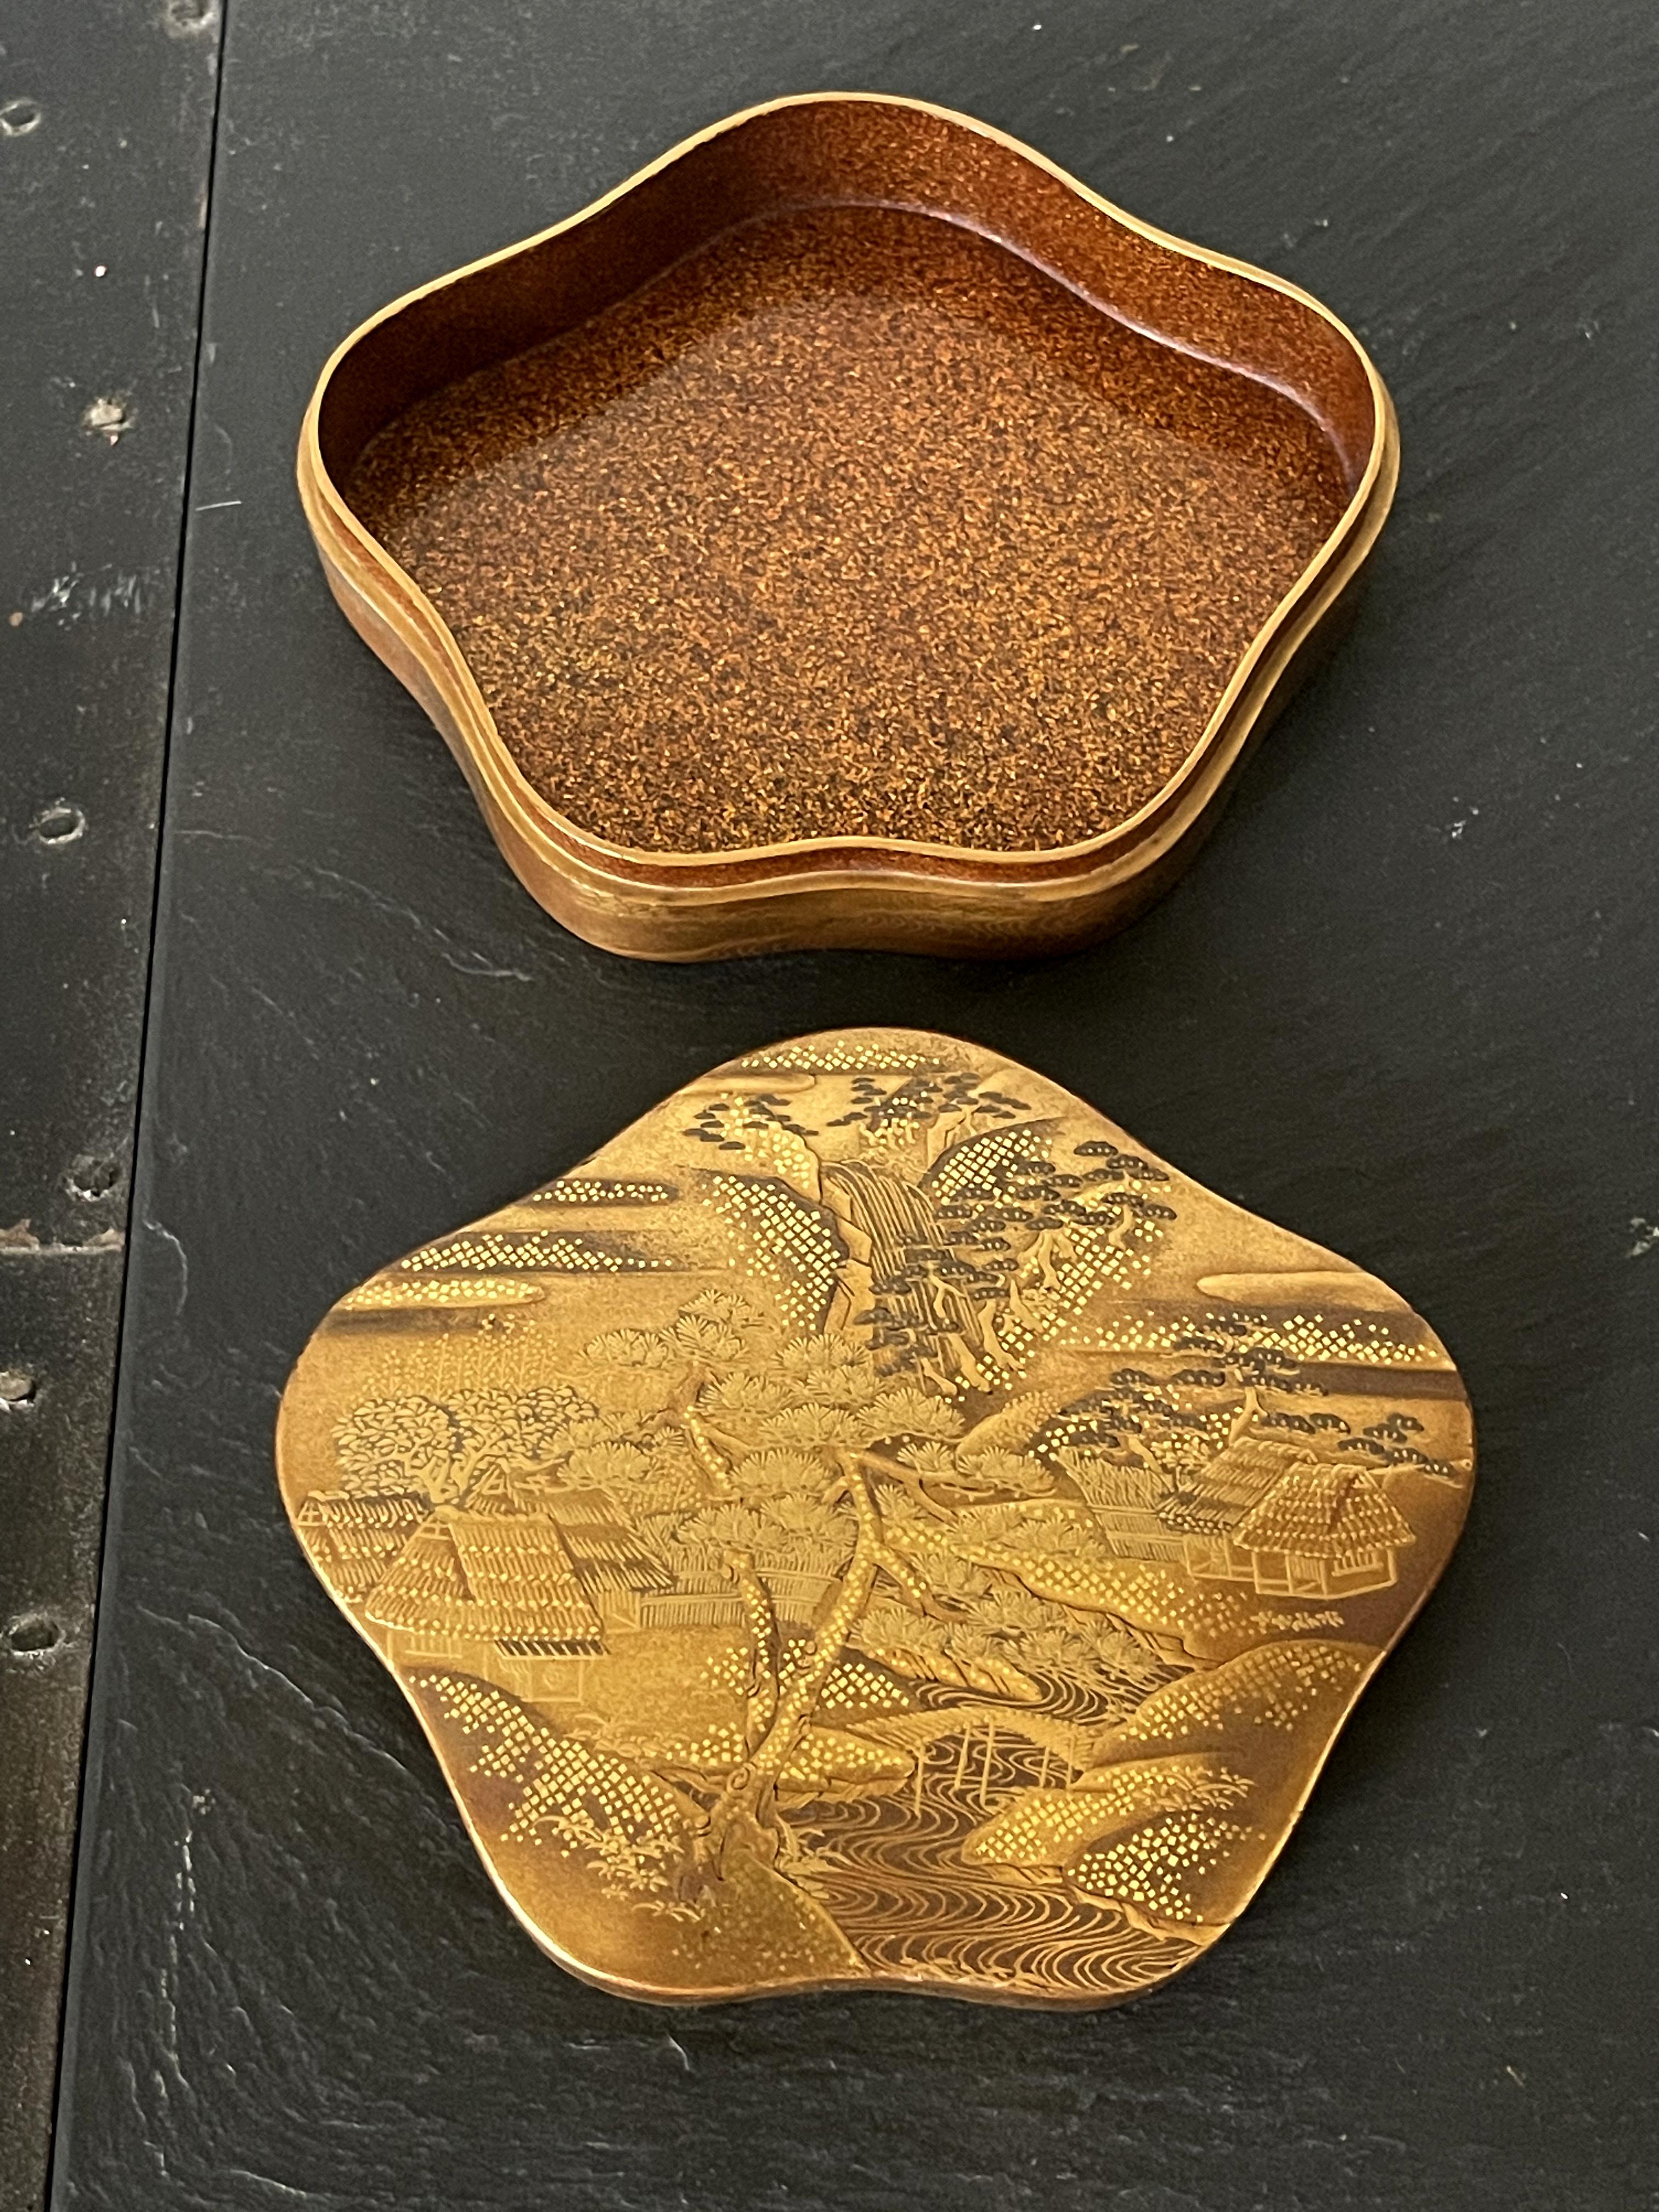 A lovely Japanese Maki-e lacquer box circa 1900s late Meiji period. The small box takes an slightly unusual organic shape that is reminiscent of the five petal cherry flower Somei Yoshino. The cover of the lid is lavishly decorated with Hiramakie,